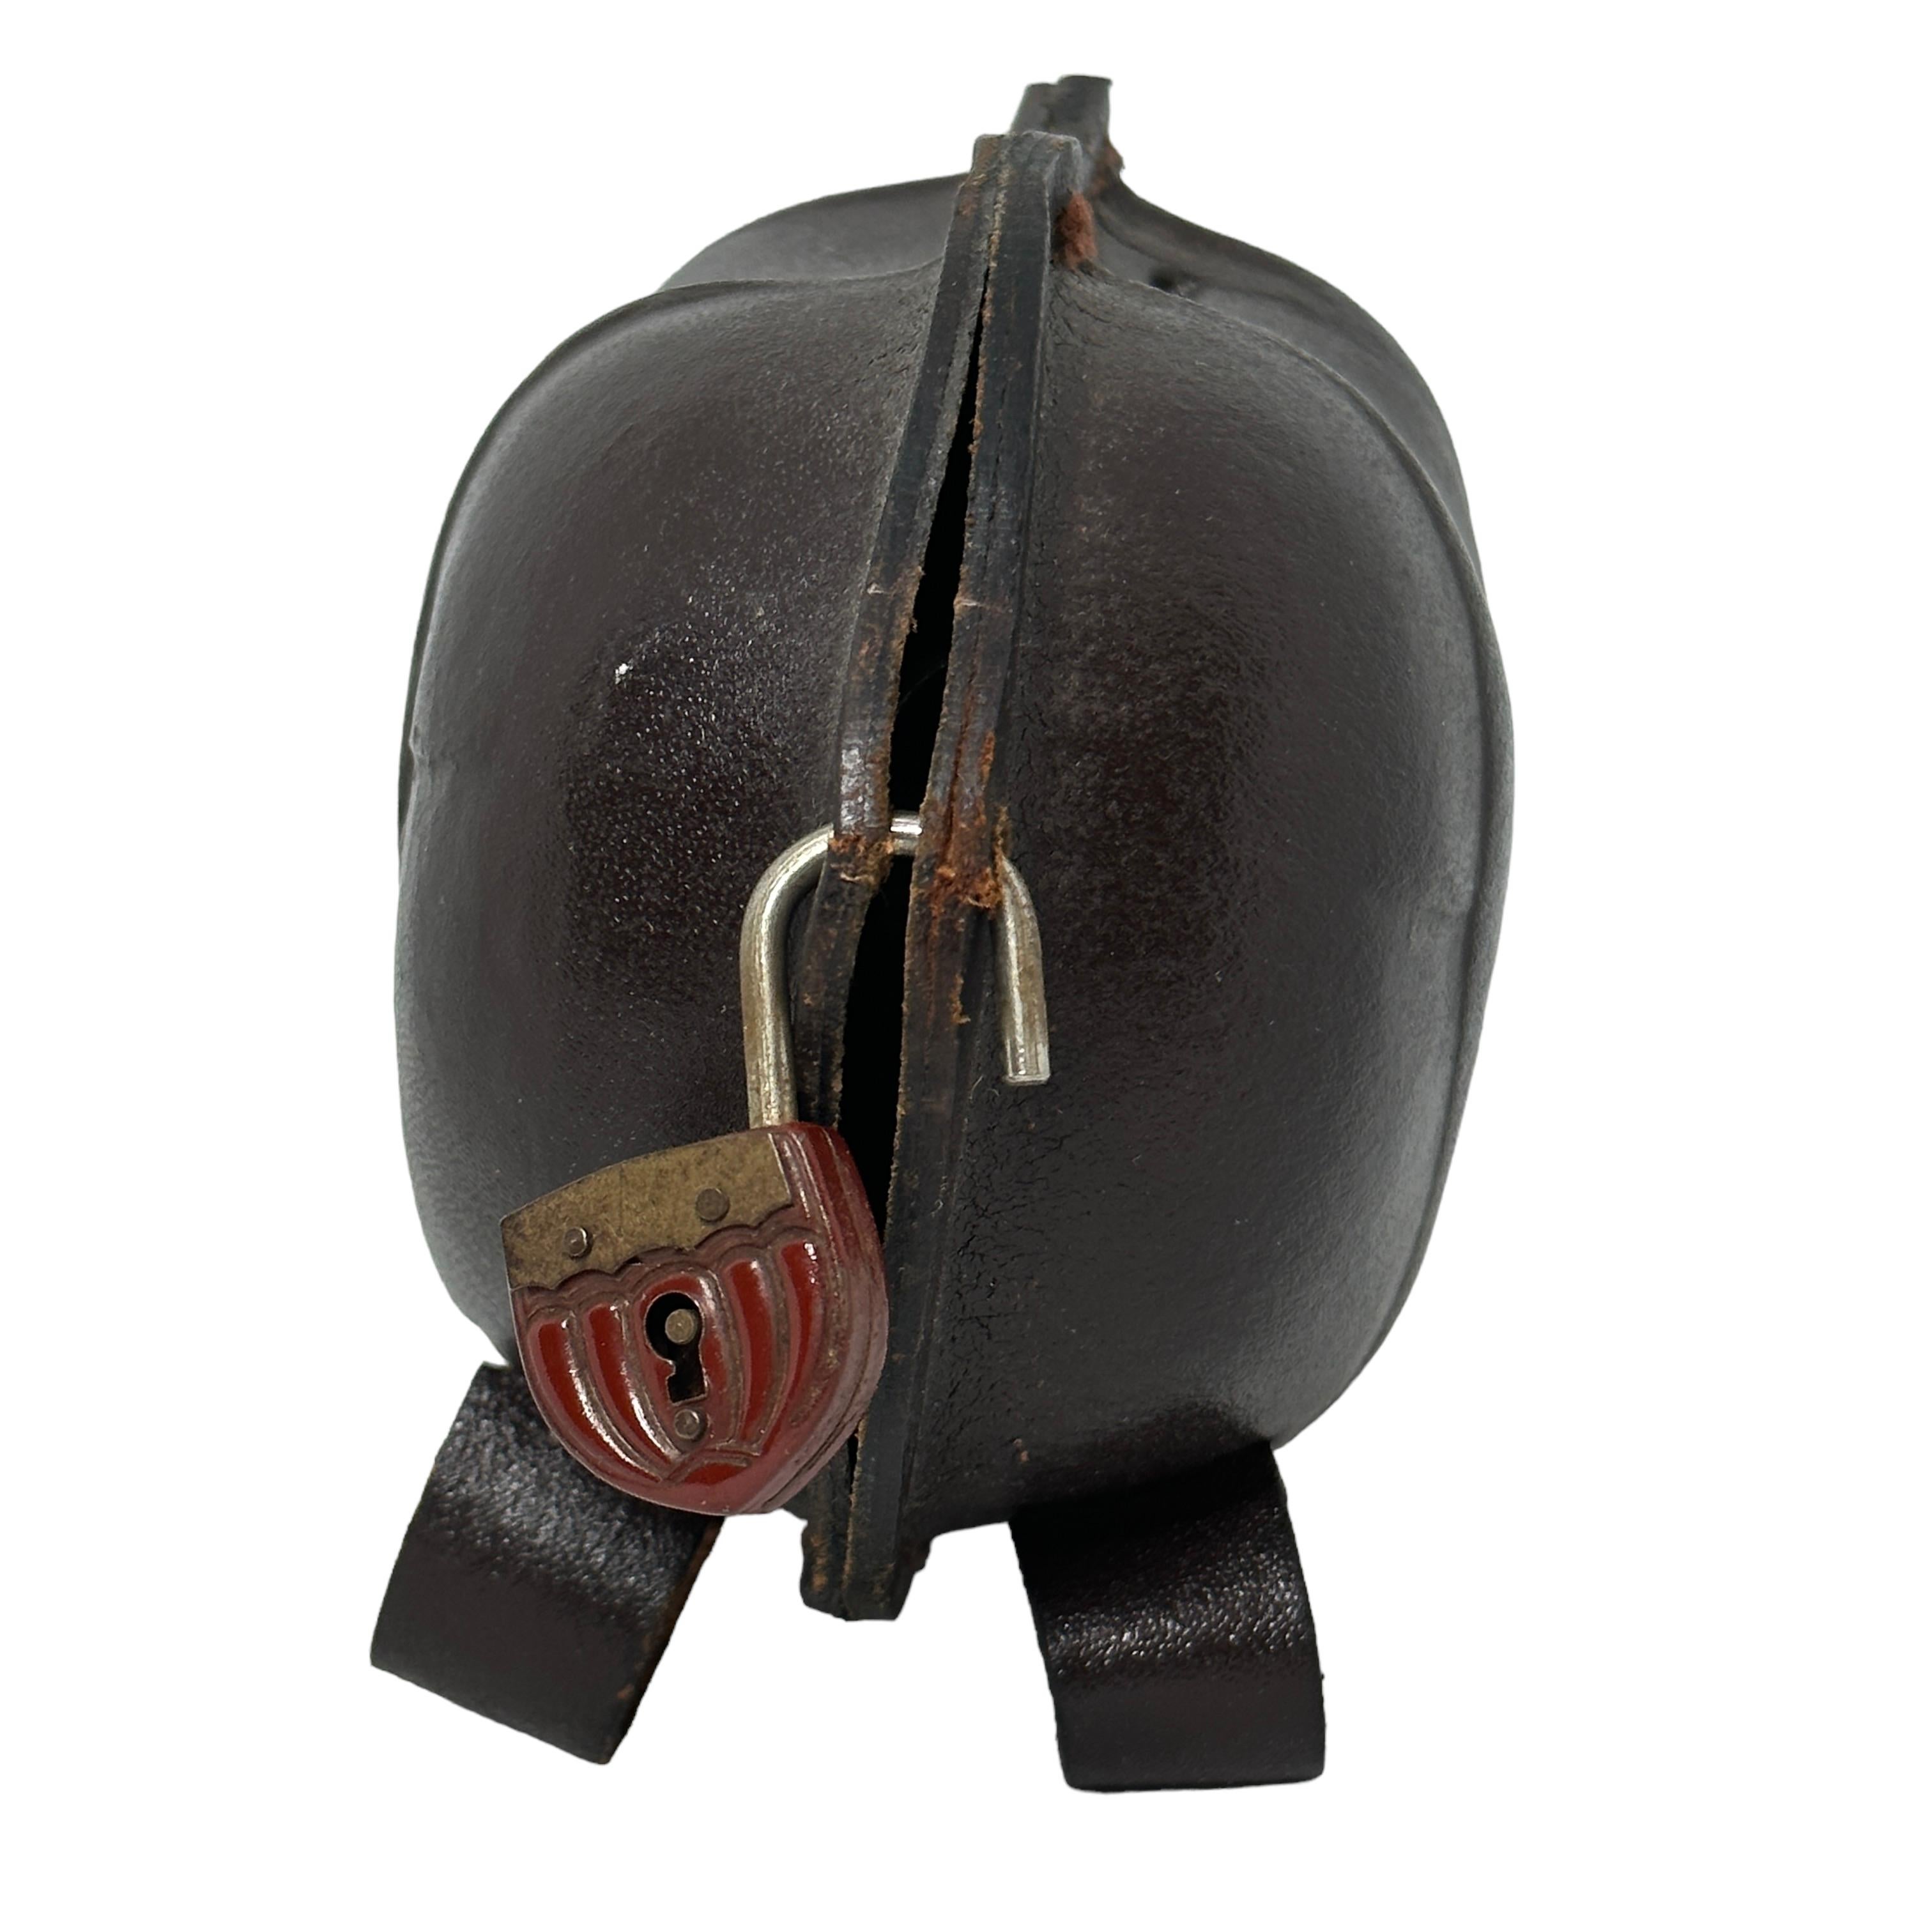 Rhino Money Box Piggy Bank Made of Leather Mid-Century Modern, 1970s For Sale 1